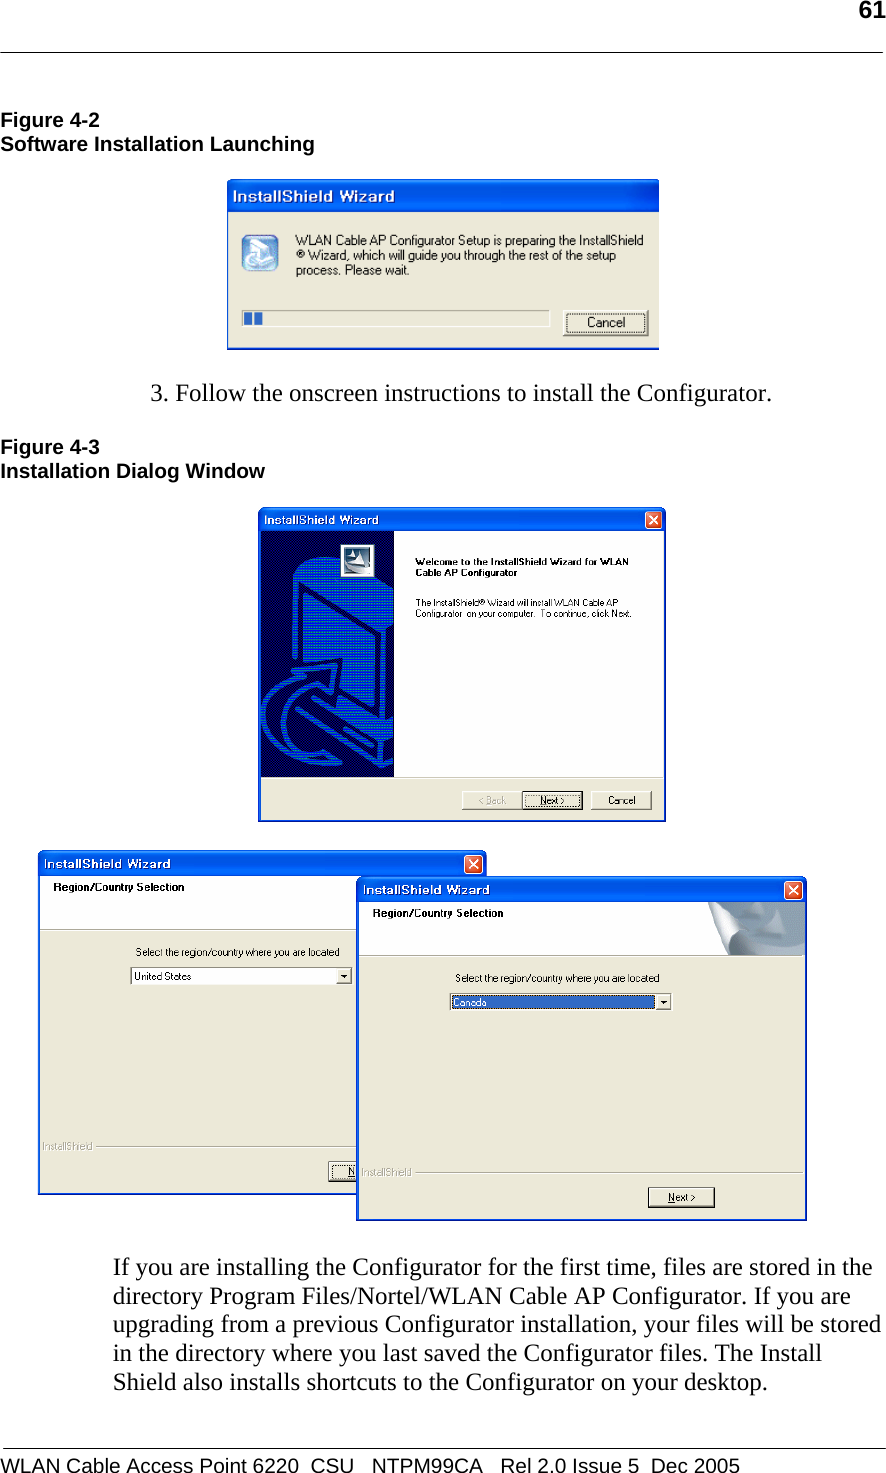   61  WLAN Cable Access Point 6220  CSU   NTPM99CA   Rel 2.0 Issue 5  Dec 2005 Figure 4-2 Software Installation Launching    3. Follow the onscreen instructions to install the Configurator.   Figure 4-3 Installation Dialog Window        If you are installing the Configurator for the first time, files are stored in the directory Program Files/Nortel/WLAN Cable AP Configurator. If you are upgrading from a previous Configurator installation, your files will be stored in the directory where you last saved the Configurator files. The Install Shield also installs shortcuts to the Configurator on your desktop.   